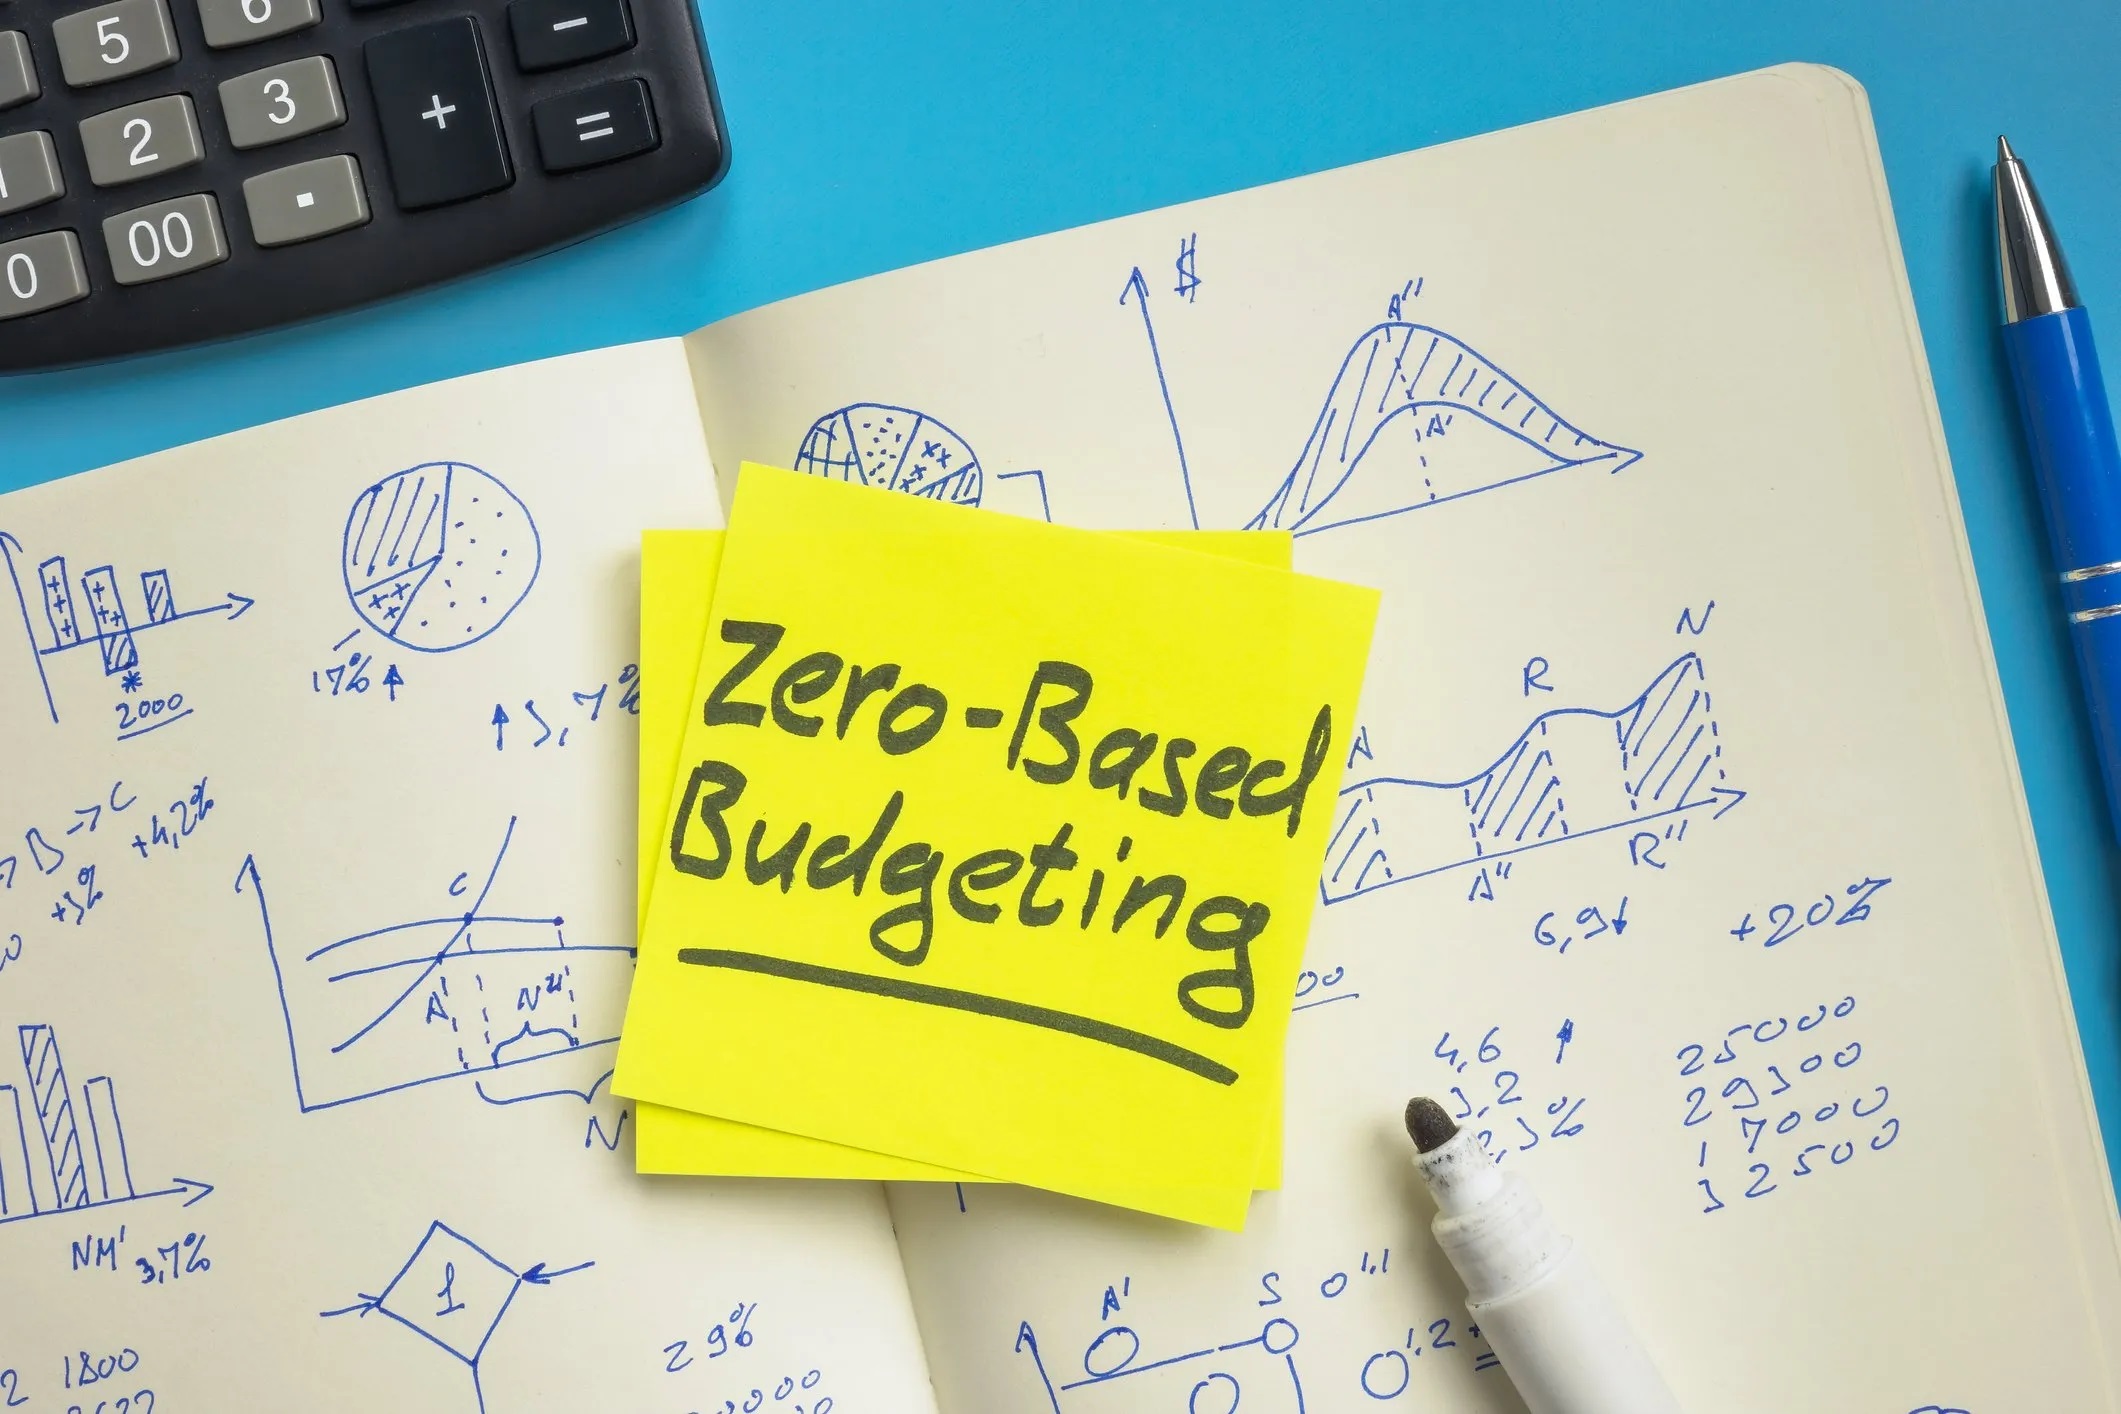 Zero-based budgeting with Accenture in Government Agencies